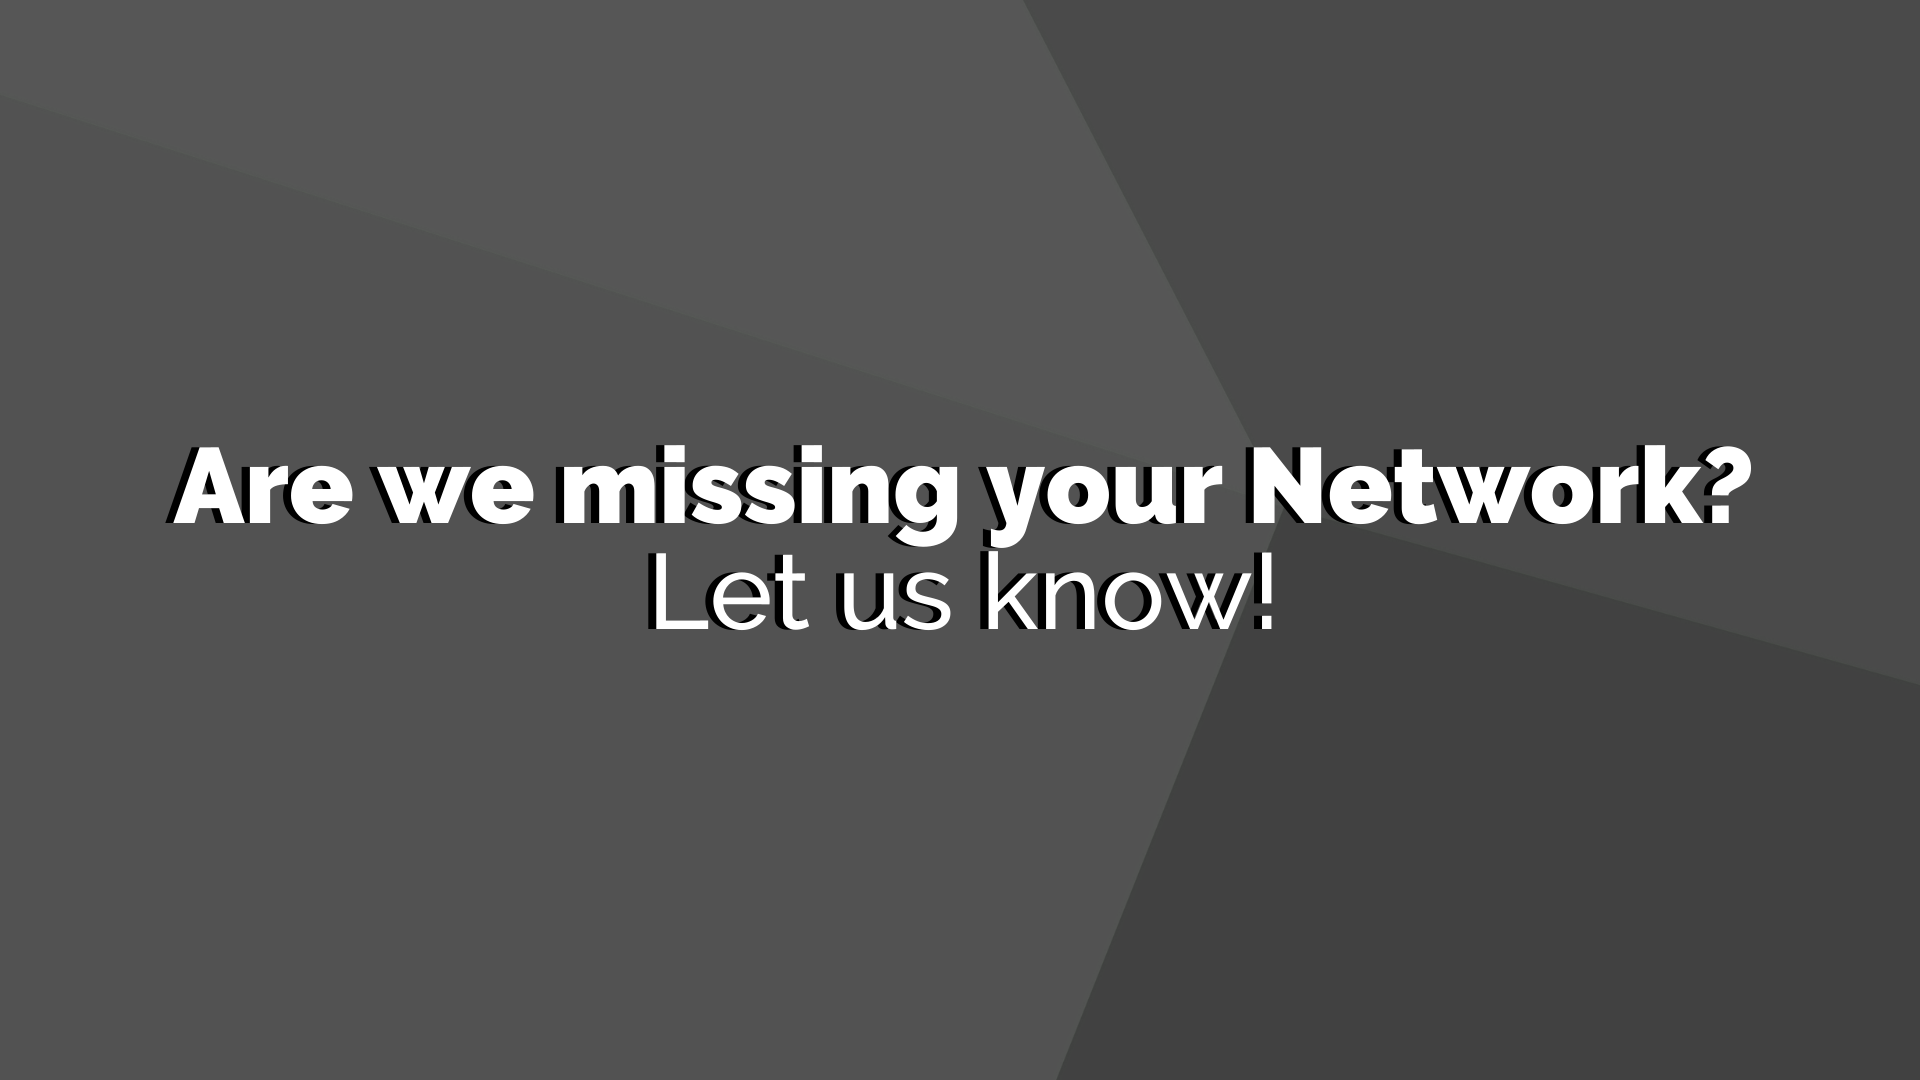 Are we missing your network? Let us know!